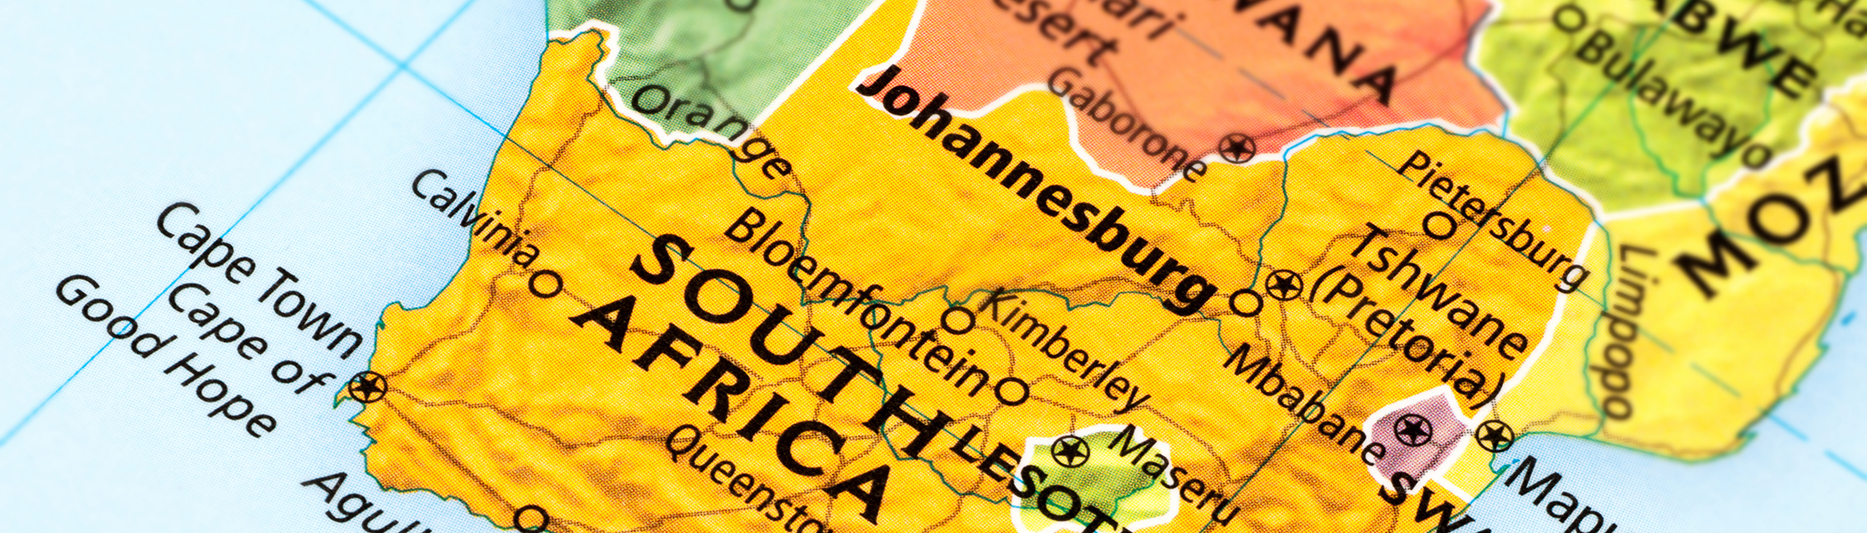 South Africa immigration 2021 outlook FAQ series (Part 2 of 4)